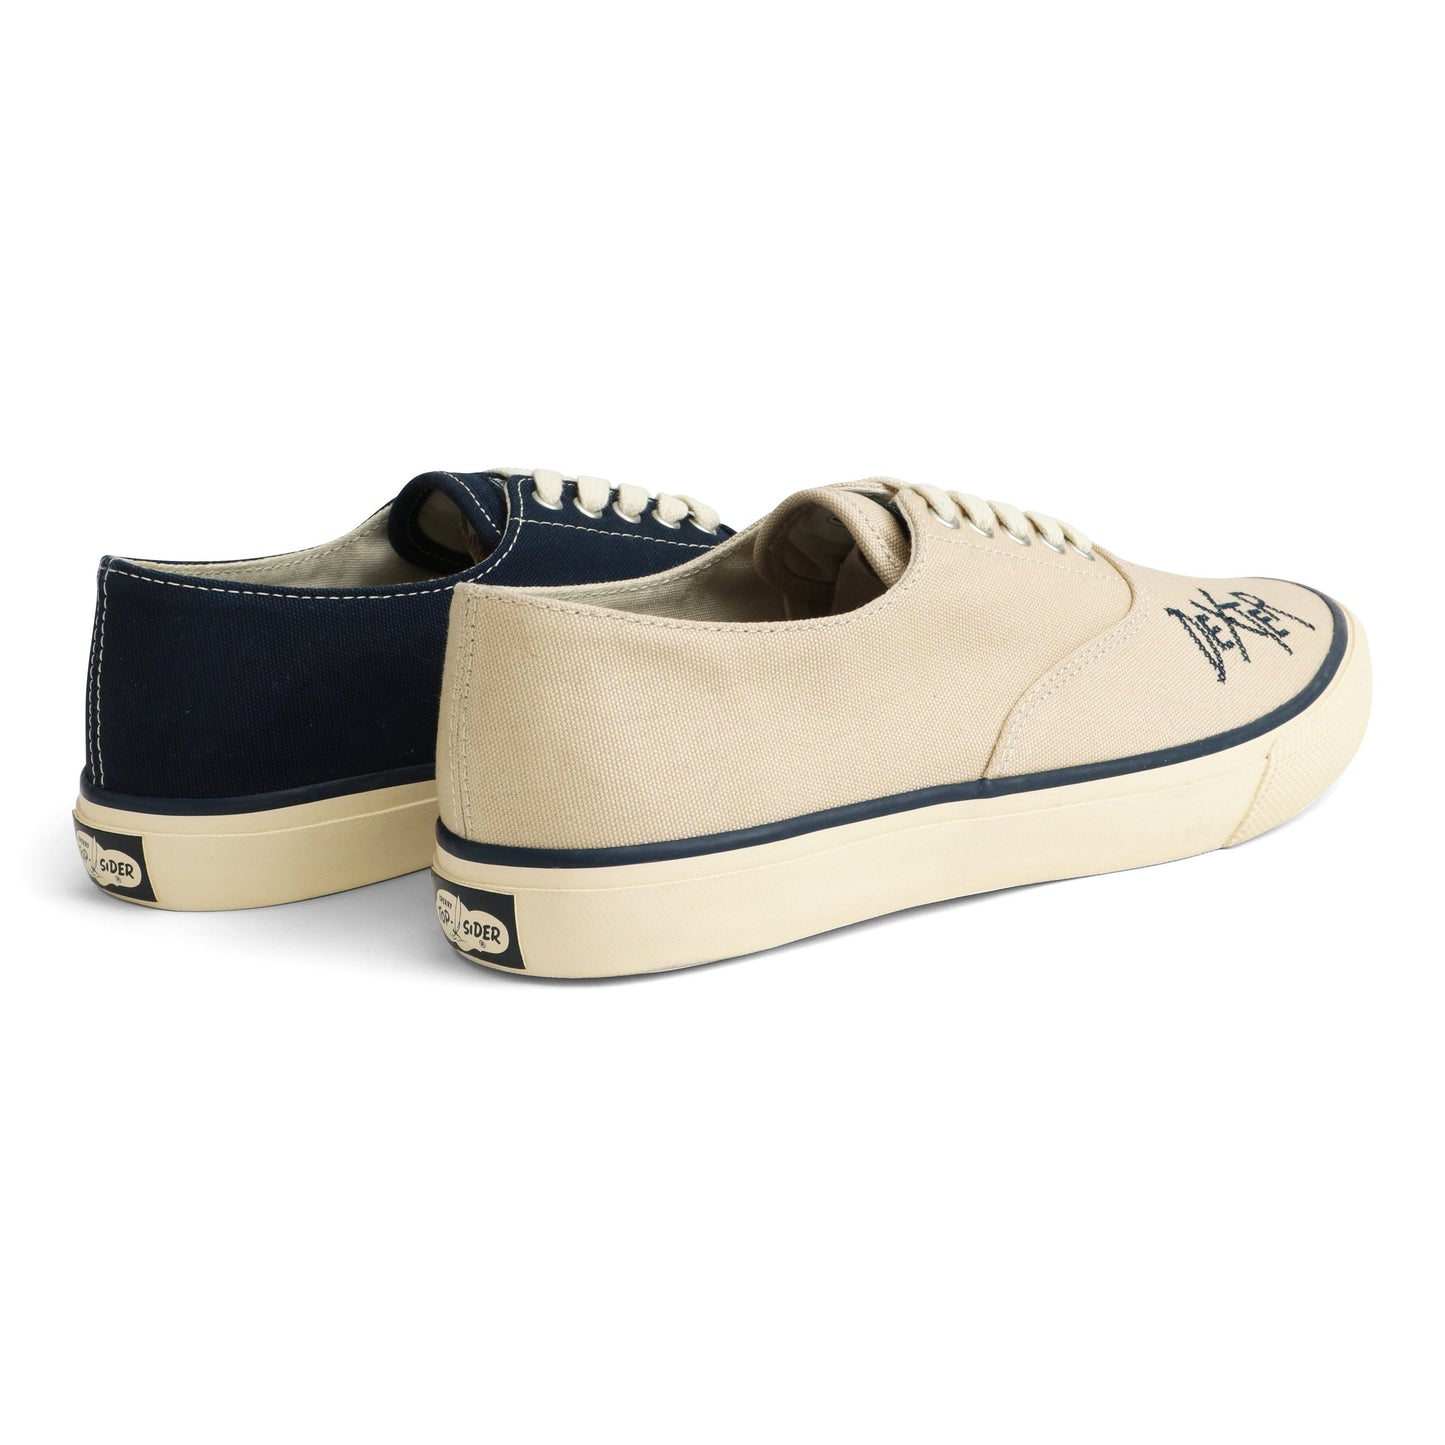 Sperry x Rowing Blazers Cloud CVO Embroidered Dexter & Sinister Sneaker